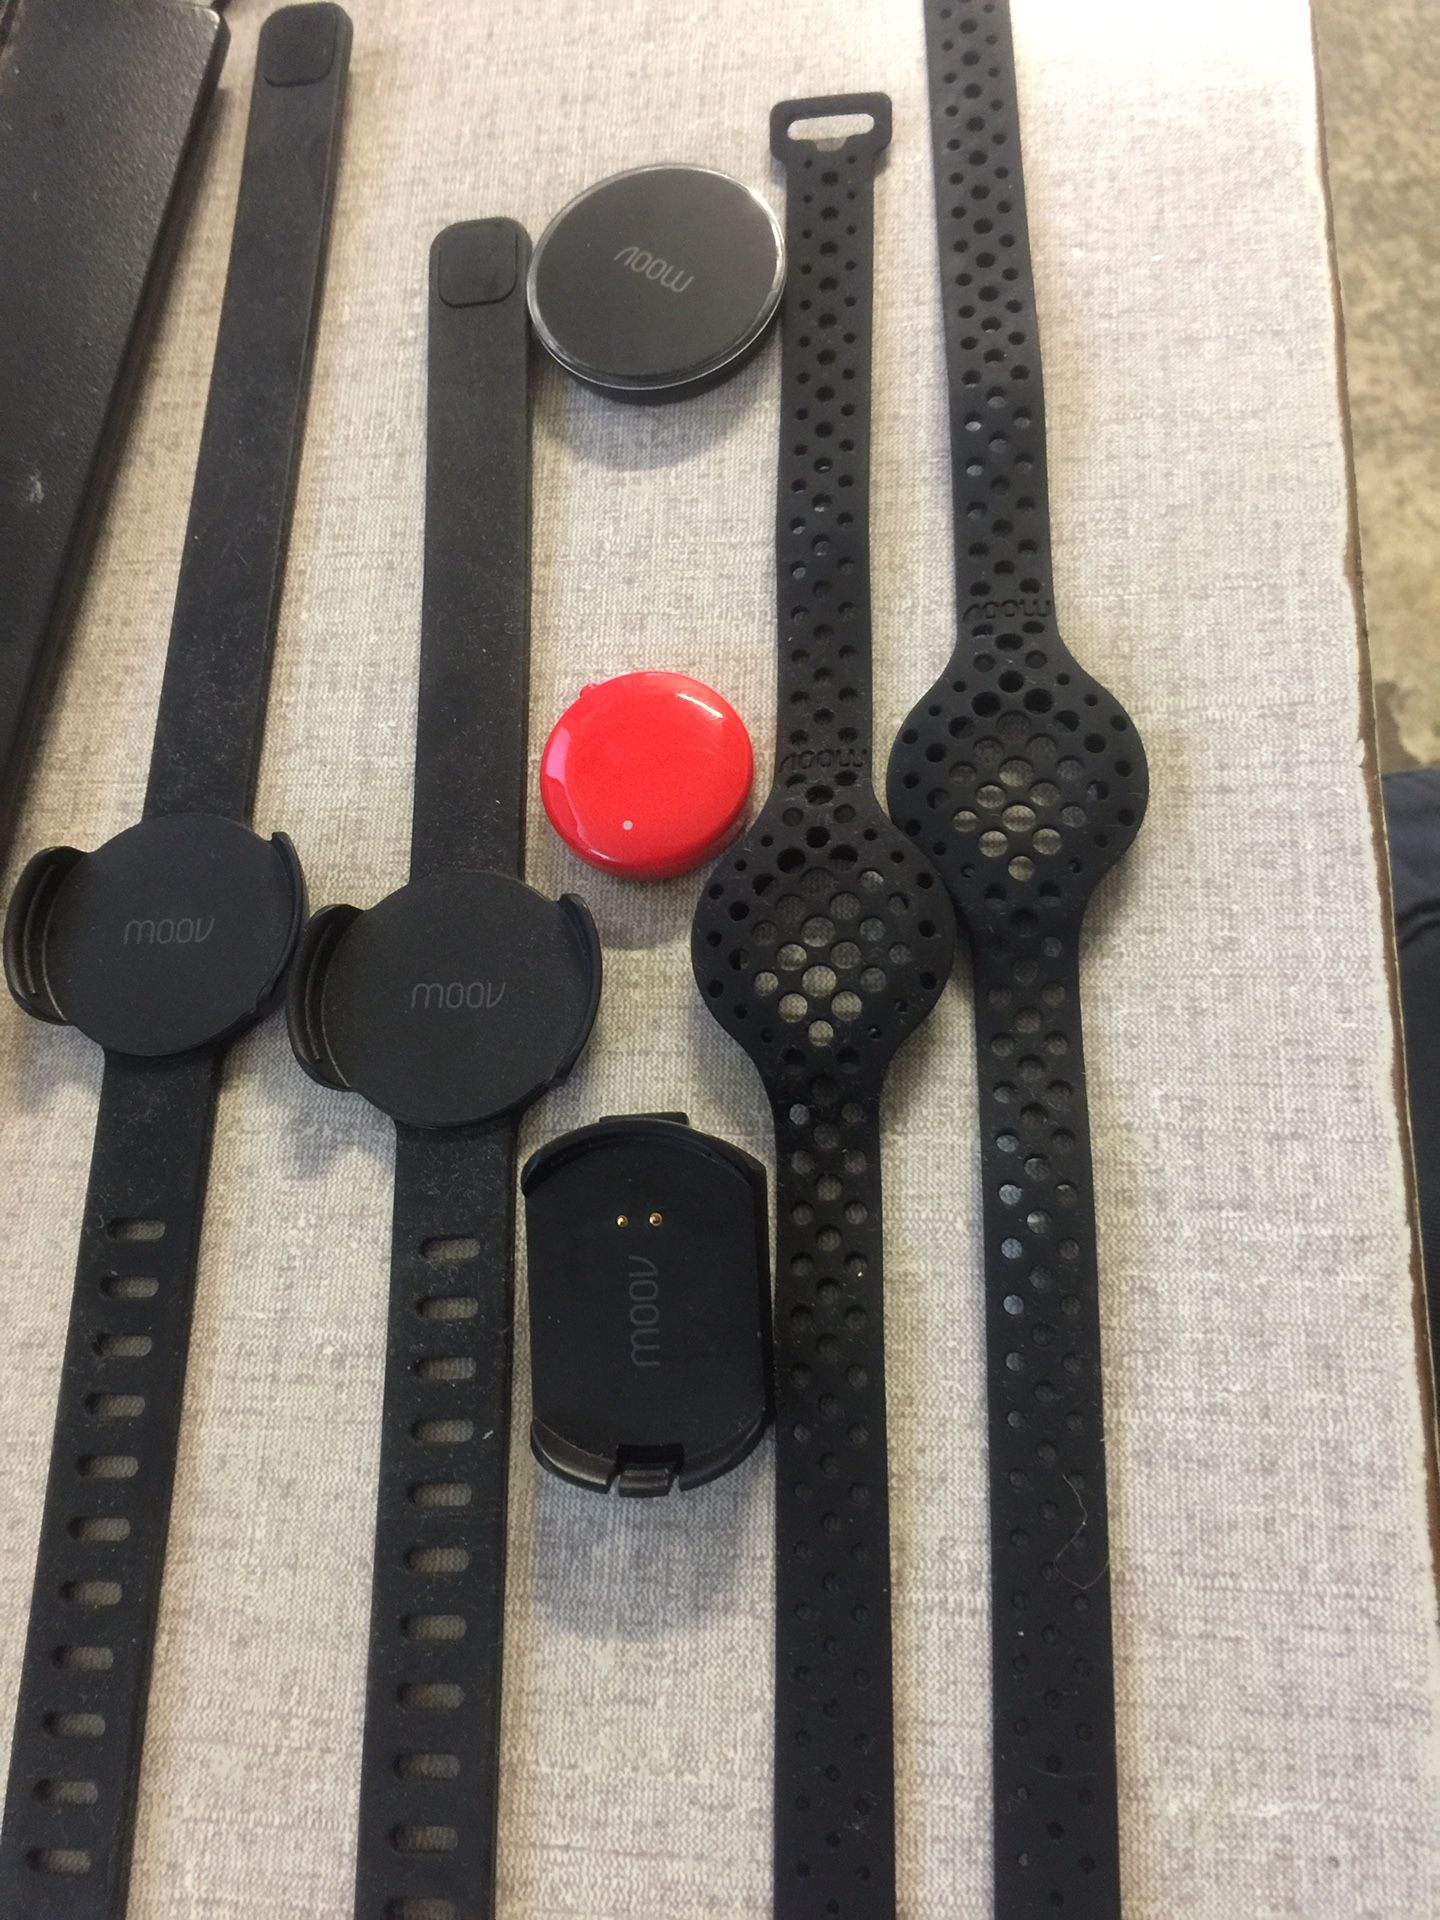 Moov now personal fitness tracker